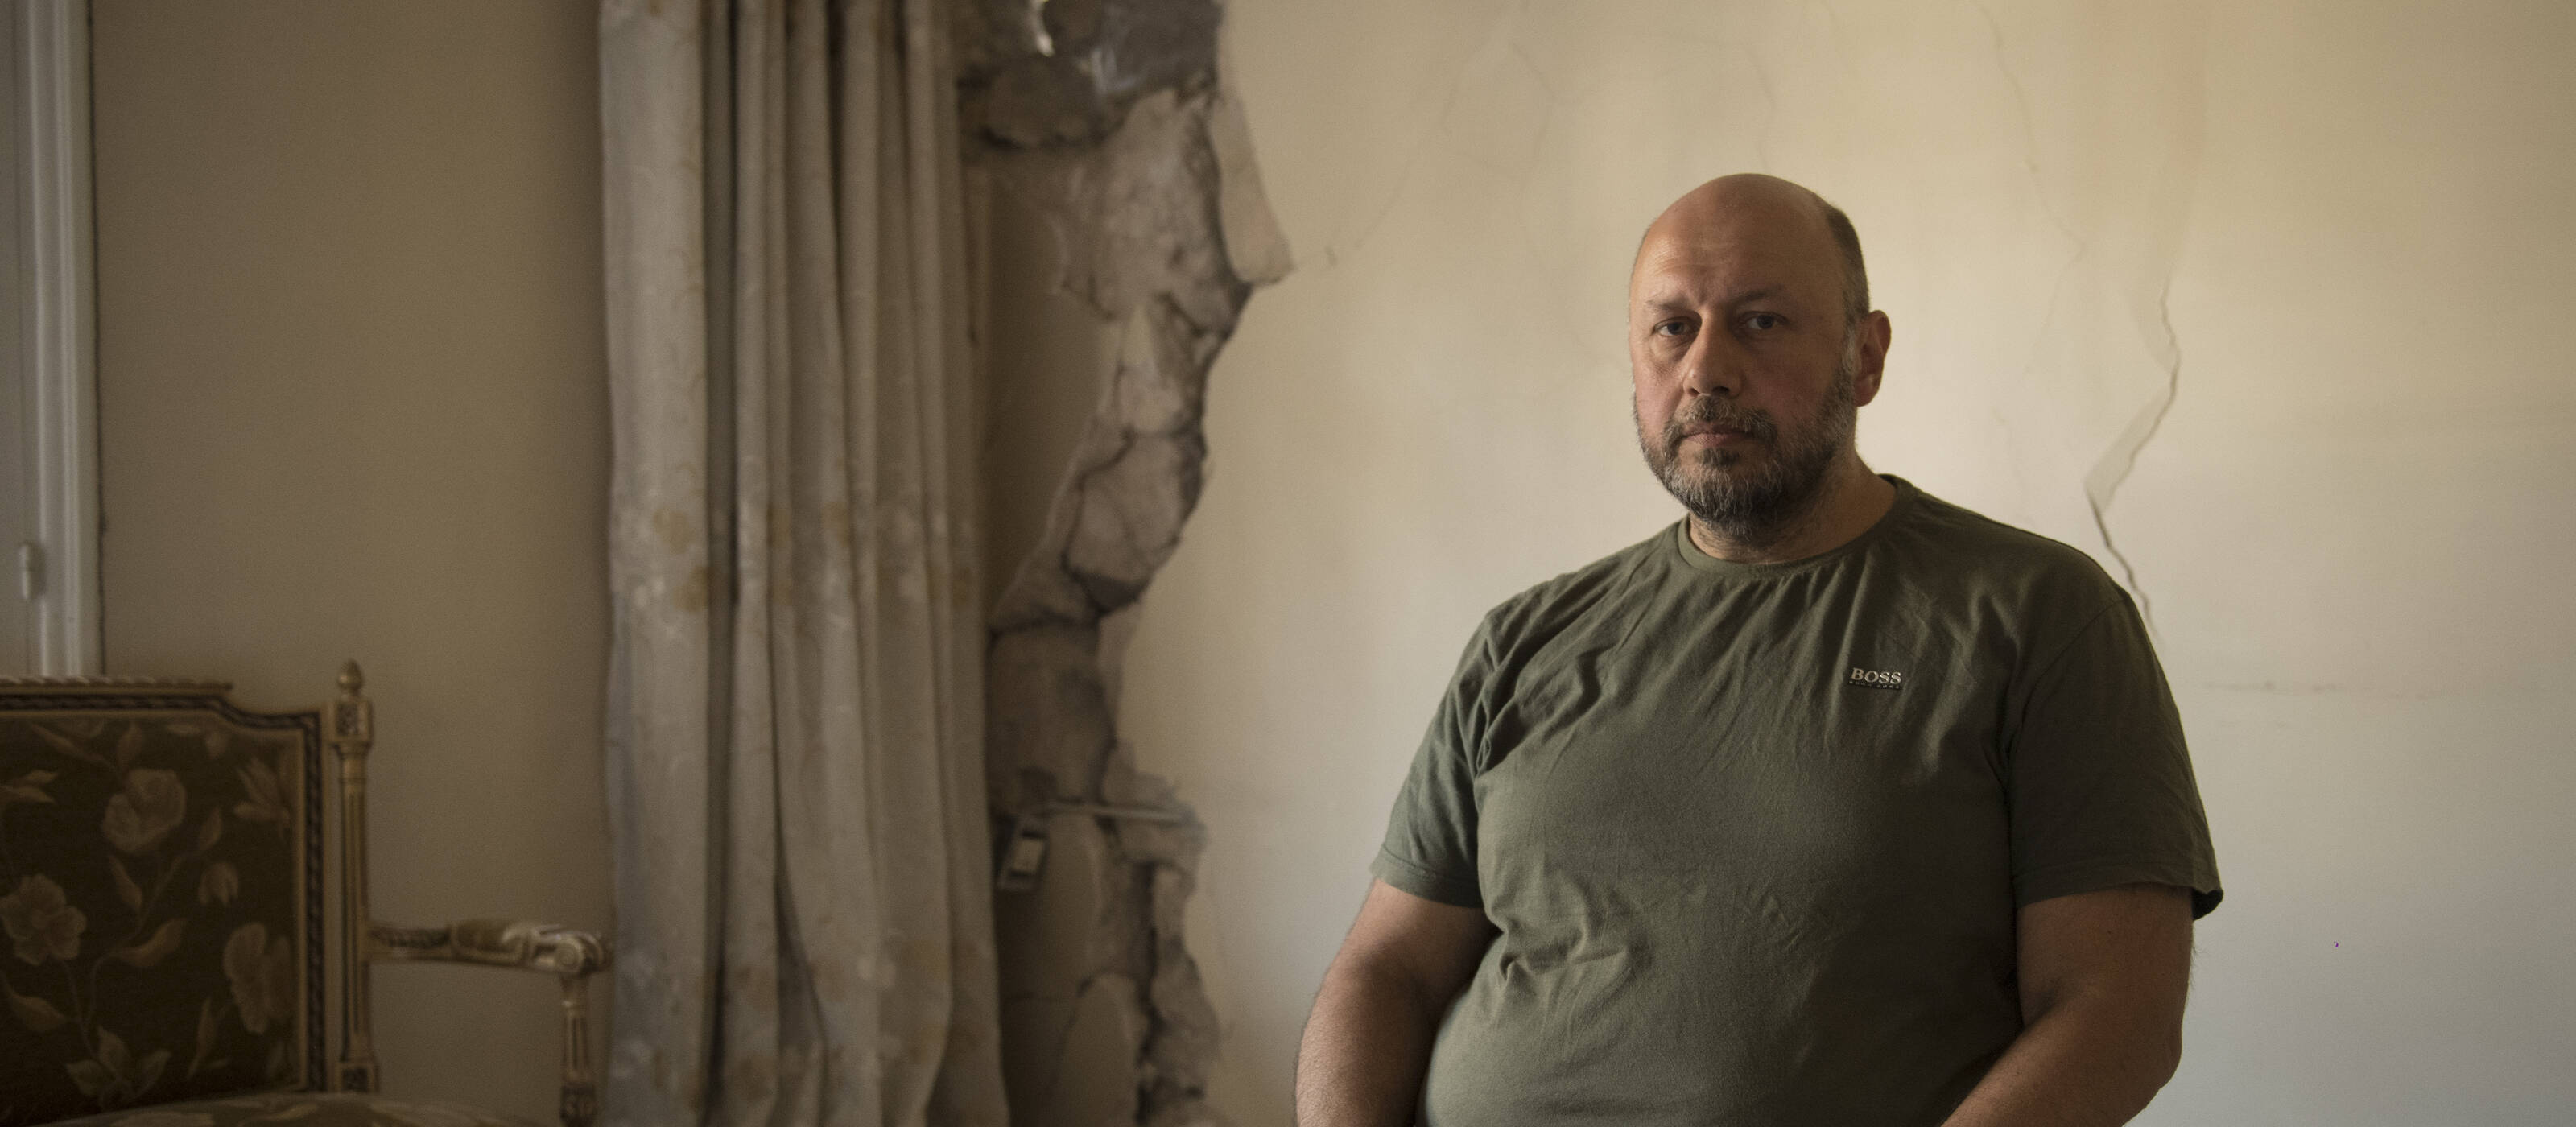 George S. in his apartment in Aleppo, which is uninhabitable because of the earthquake.